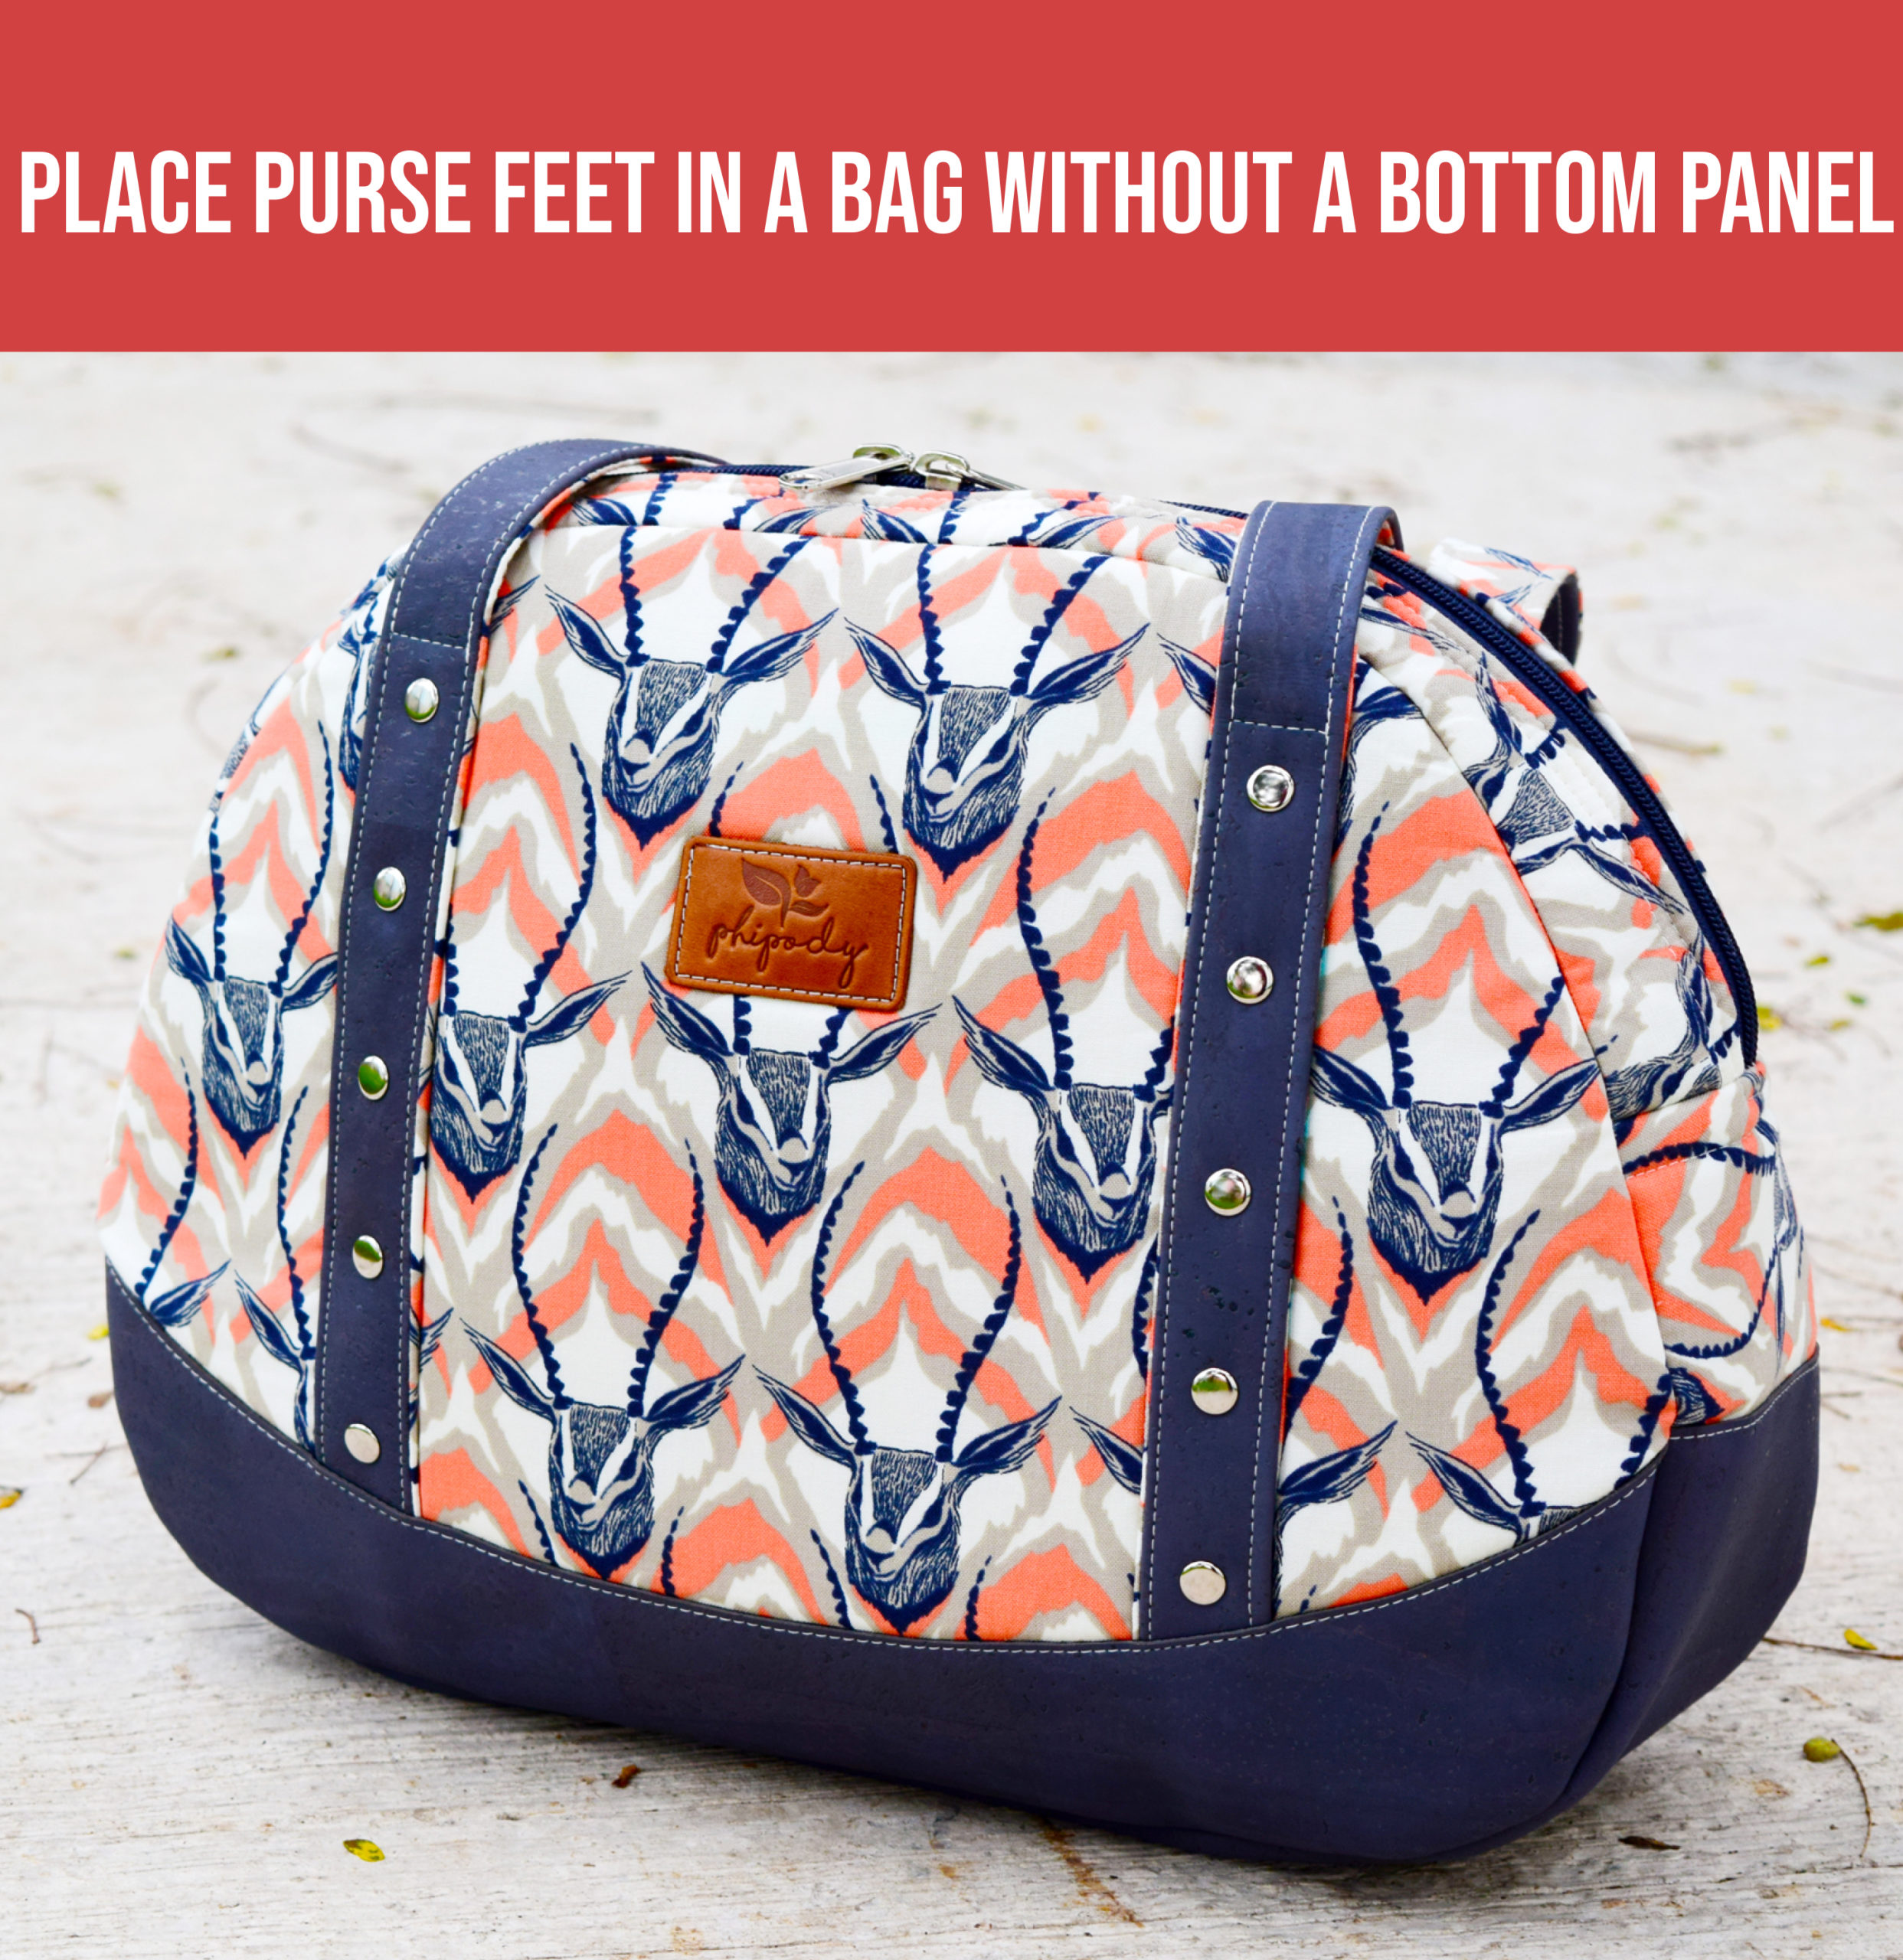 VIDEO: How to Place Purse Feet in a Bag Without a Bottom Panel